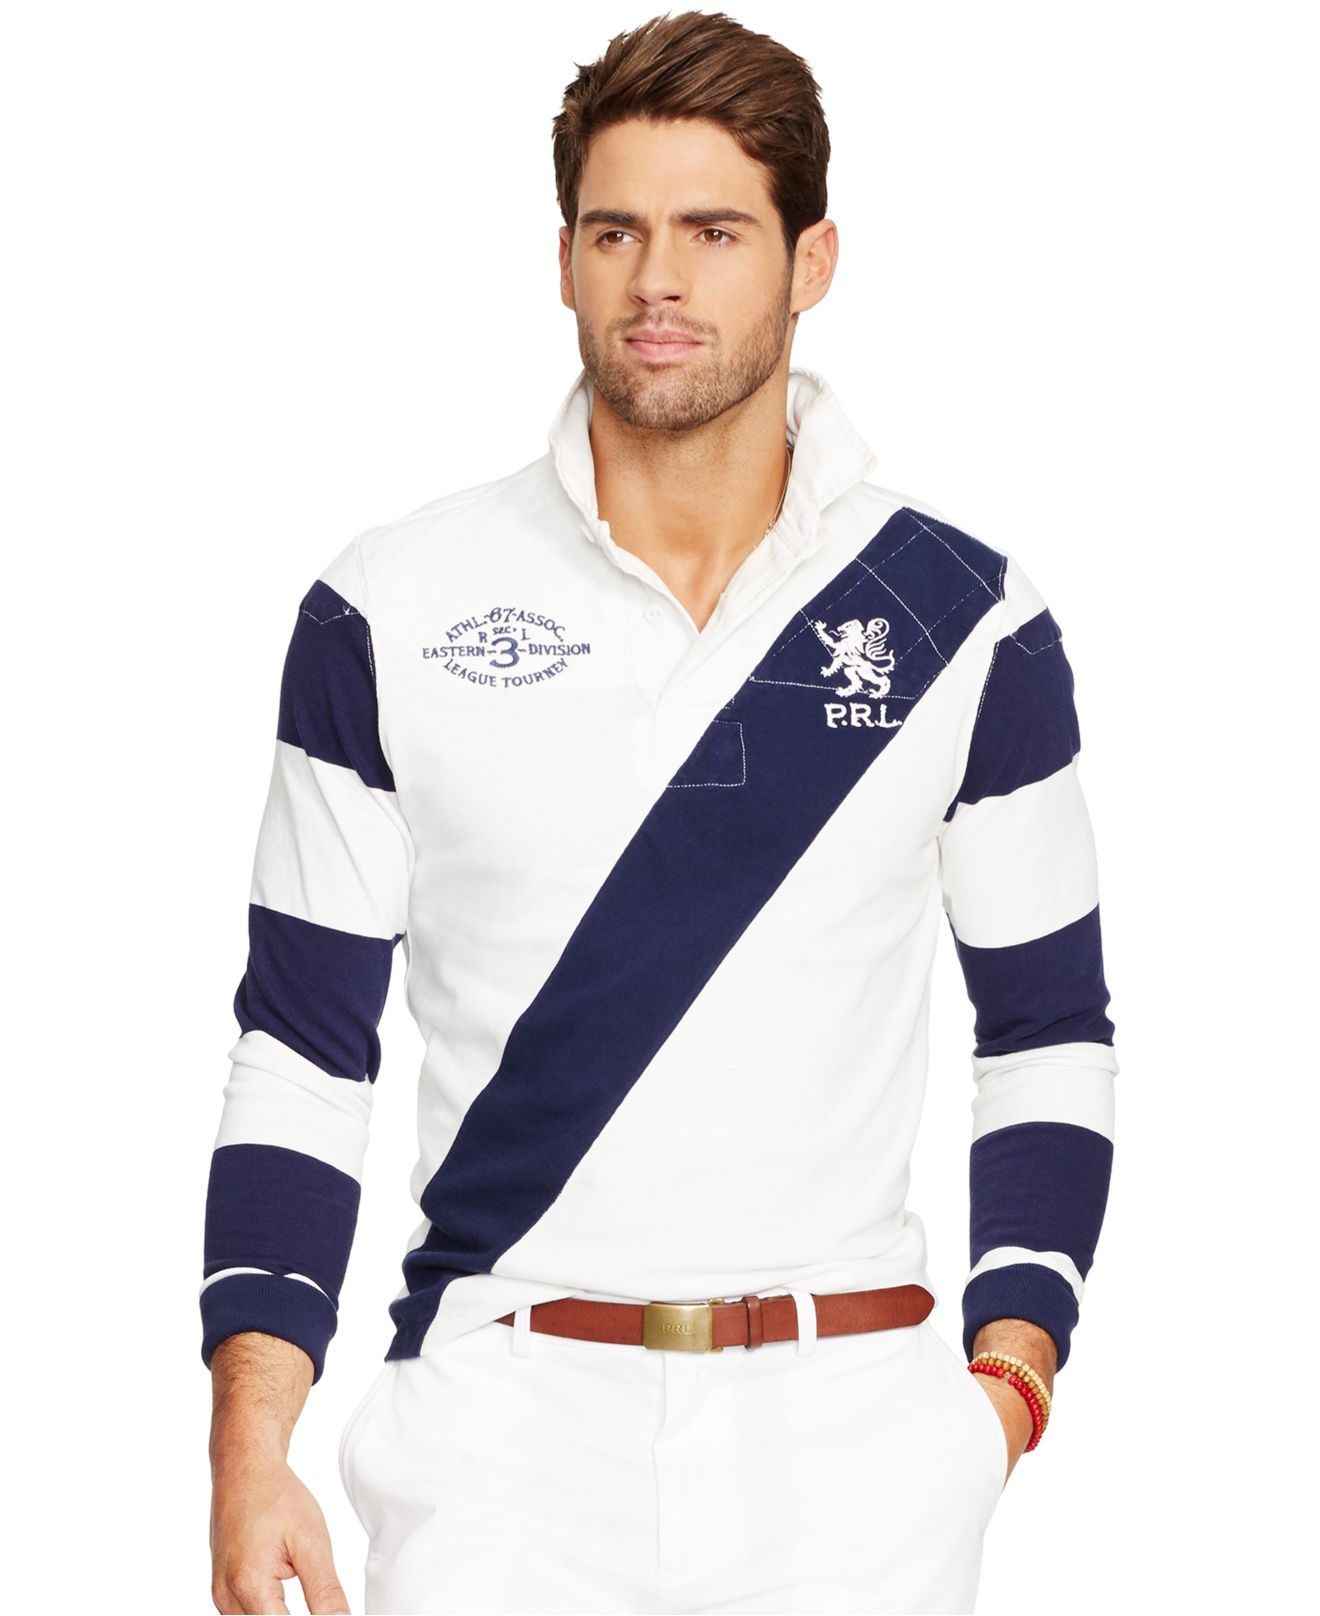 Lyst - Polo Ralph Lauren Banner-Striped Rugby Shirt in Blue for Men